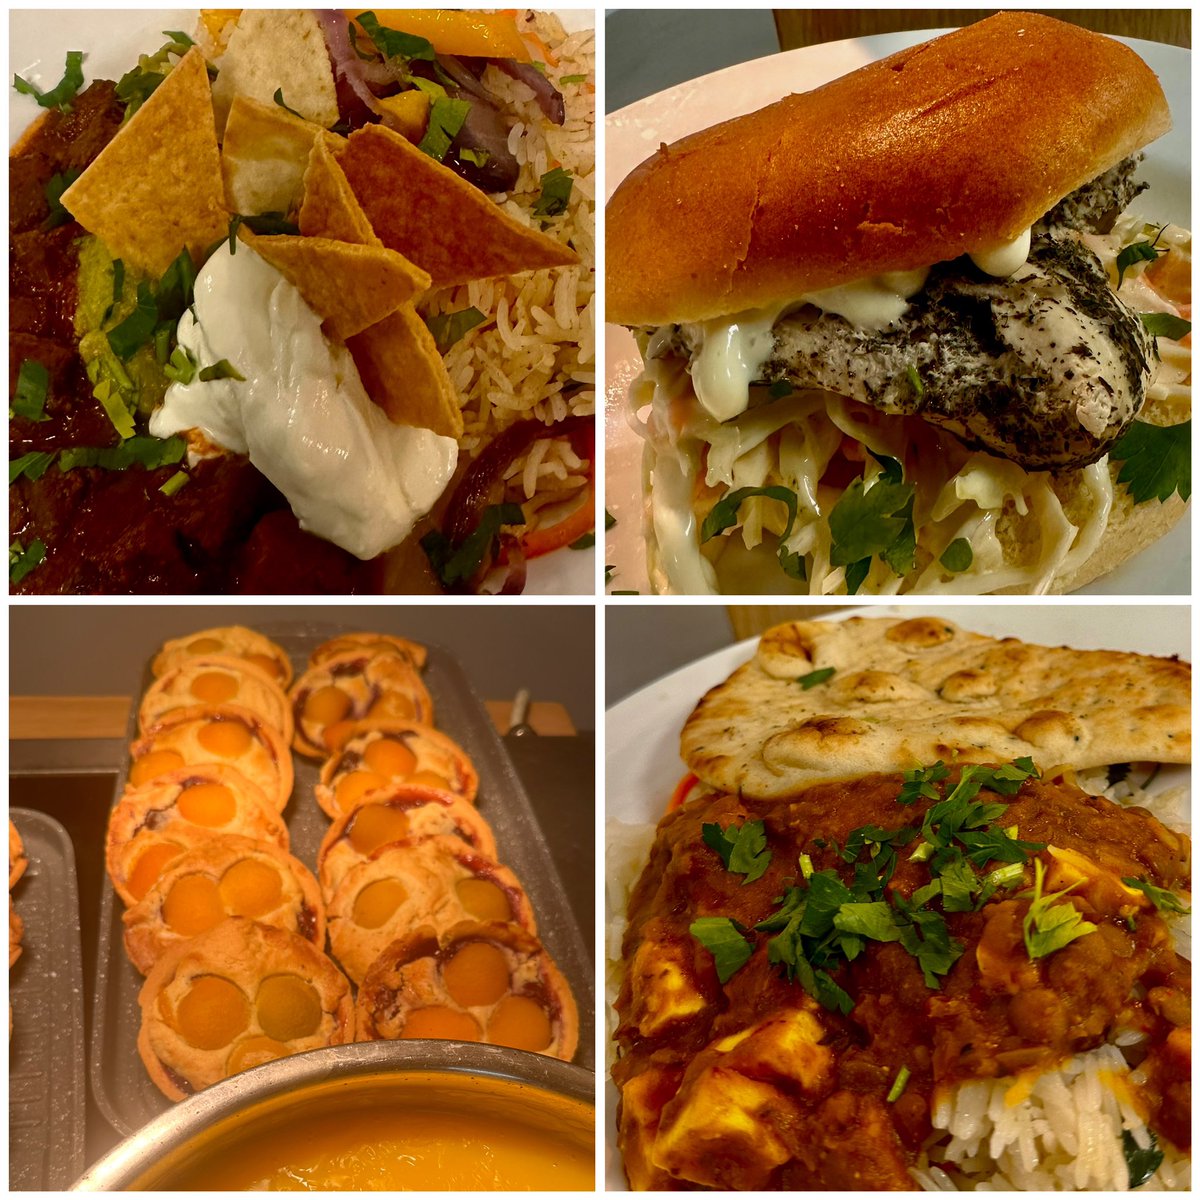 Another great visit to @Ingredi12125294 restaurant @StGeorgesTrust yesterday with the welcome return of hot desserts (on a Wednesday) for the autumn season. They offered Paneer Curry, Chilli Brisket Beef and Chicken Fillet in a bun.    #greathospitalfood #NHS #Food